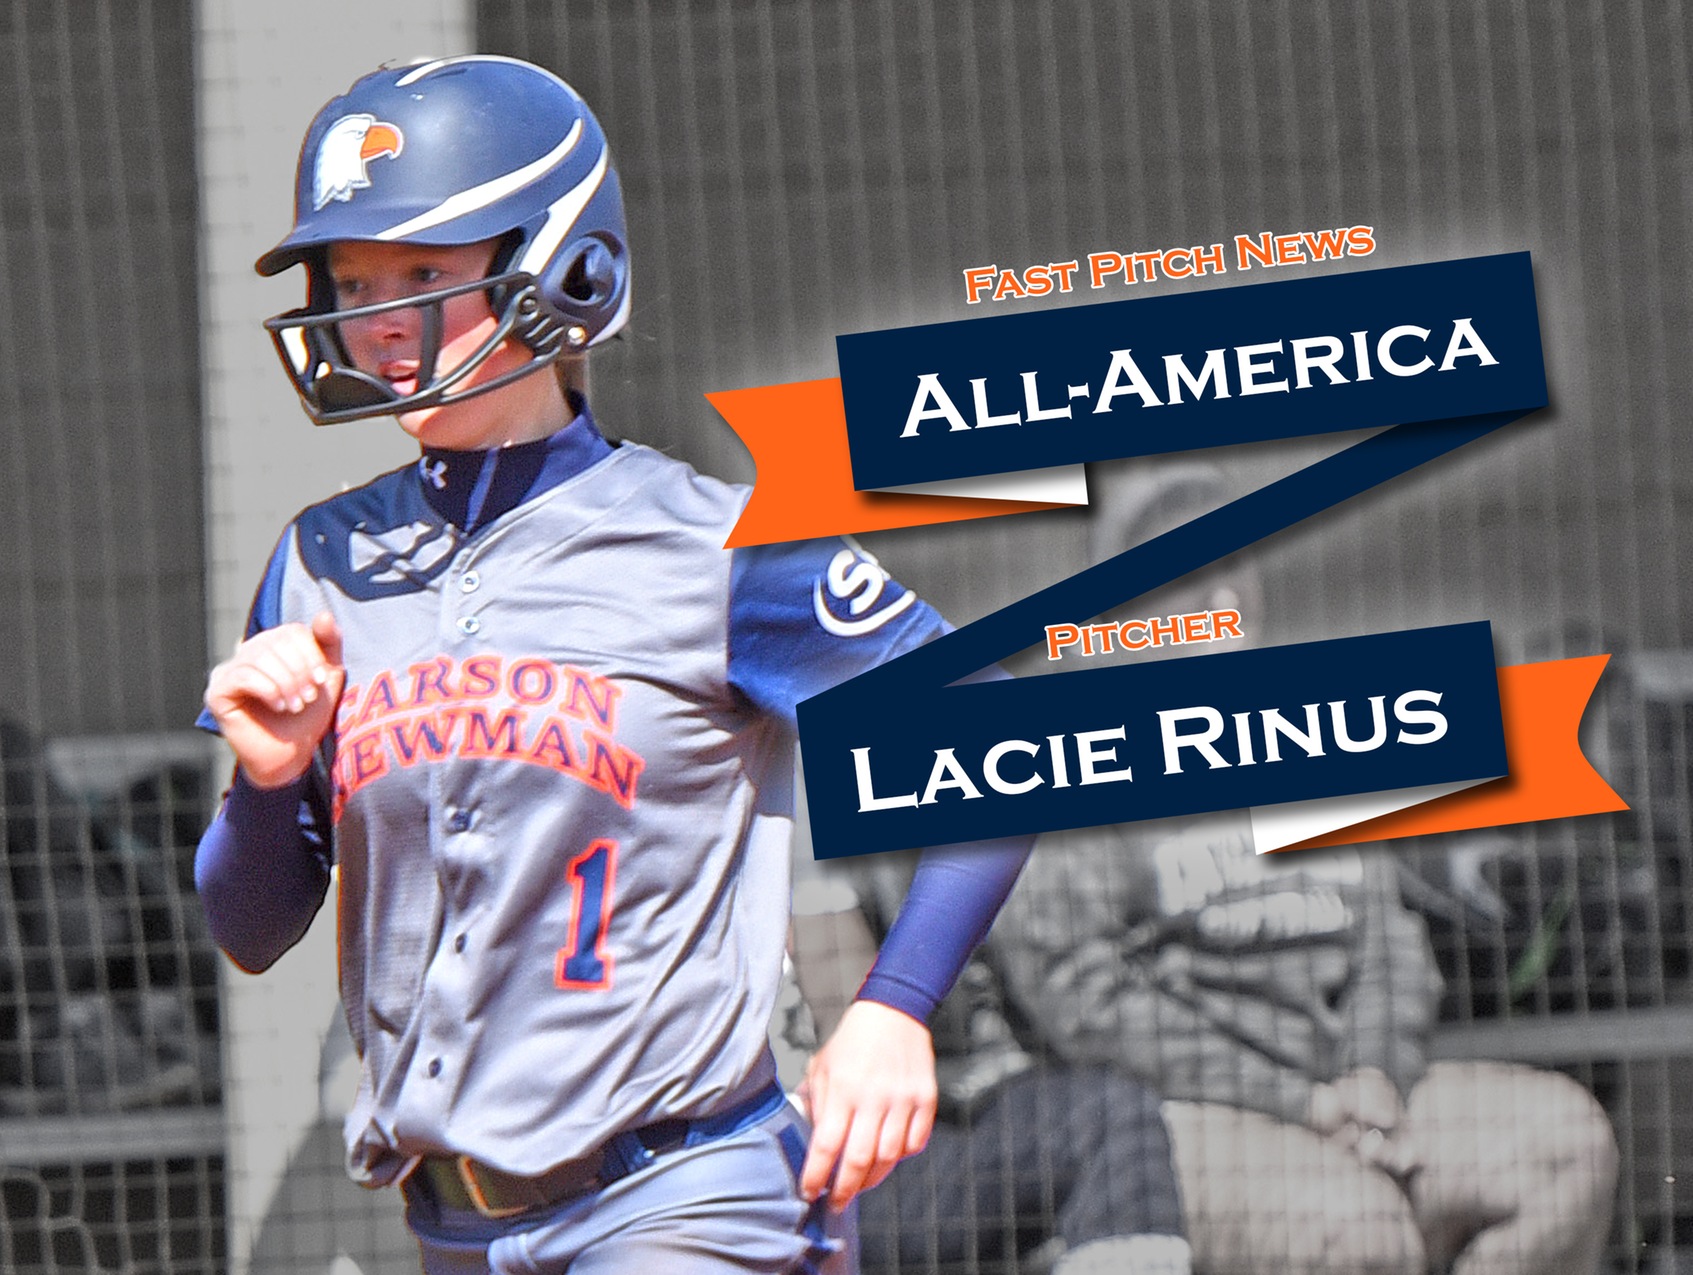 All-America accolade number three rolls in for Rinus